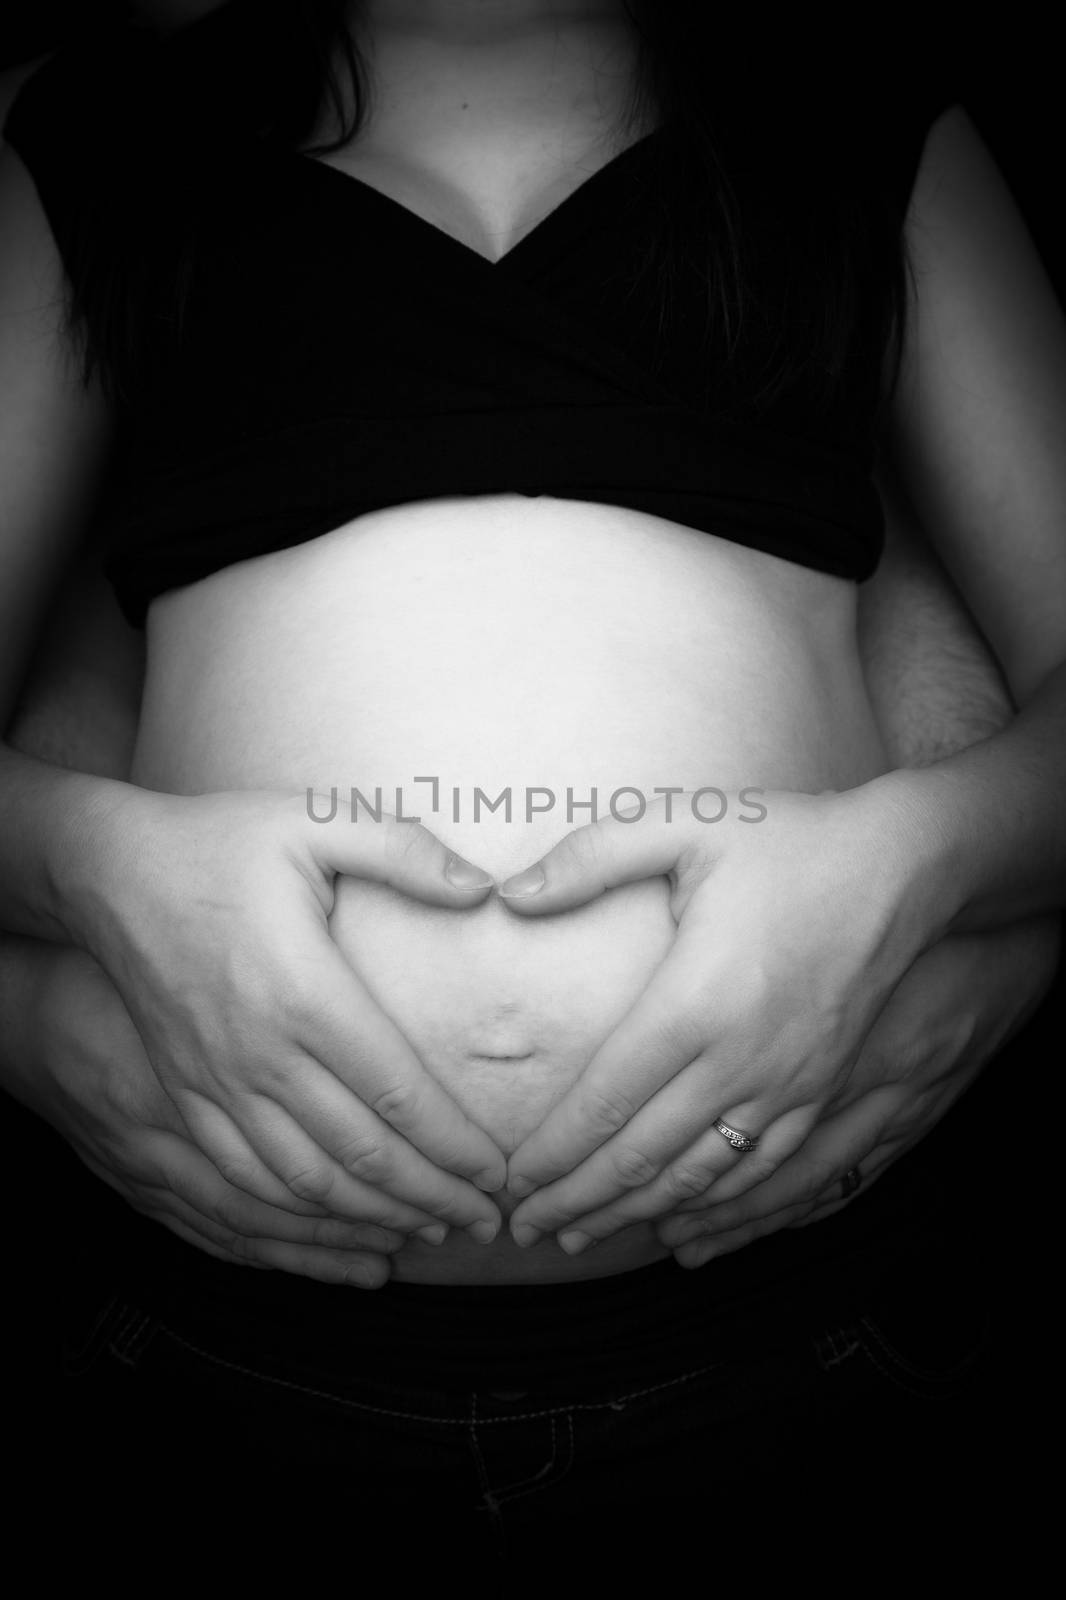 Pregnant woman making heart shape with hands over her stomach  by Izaphoto